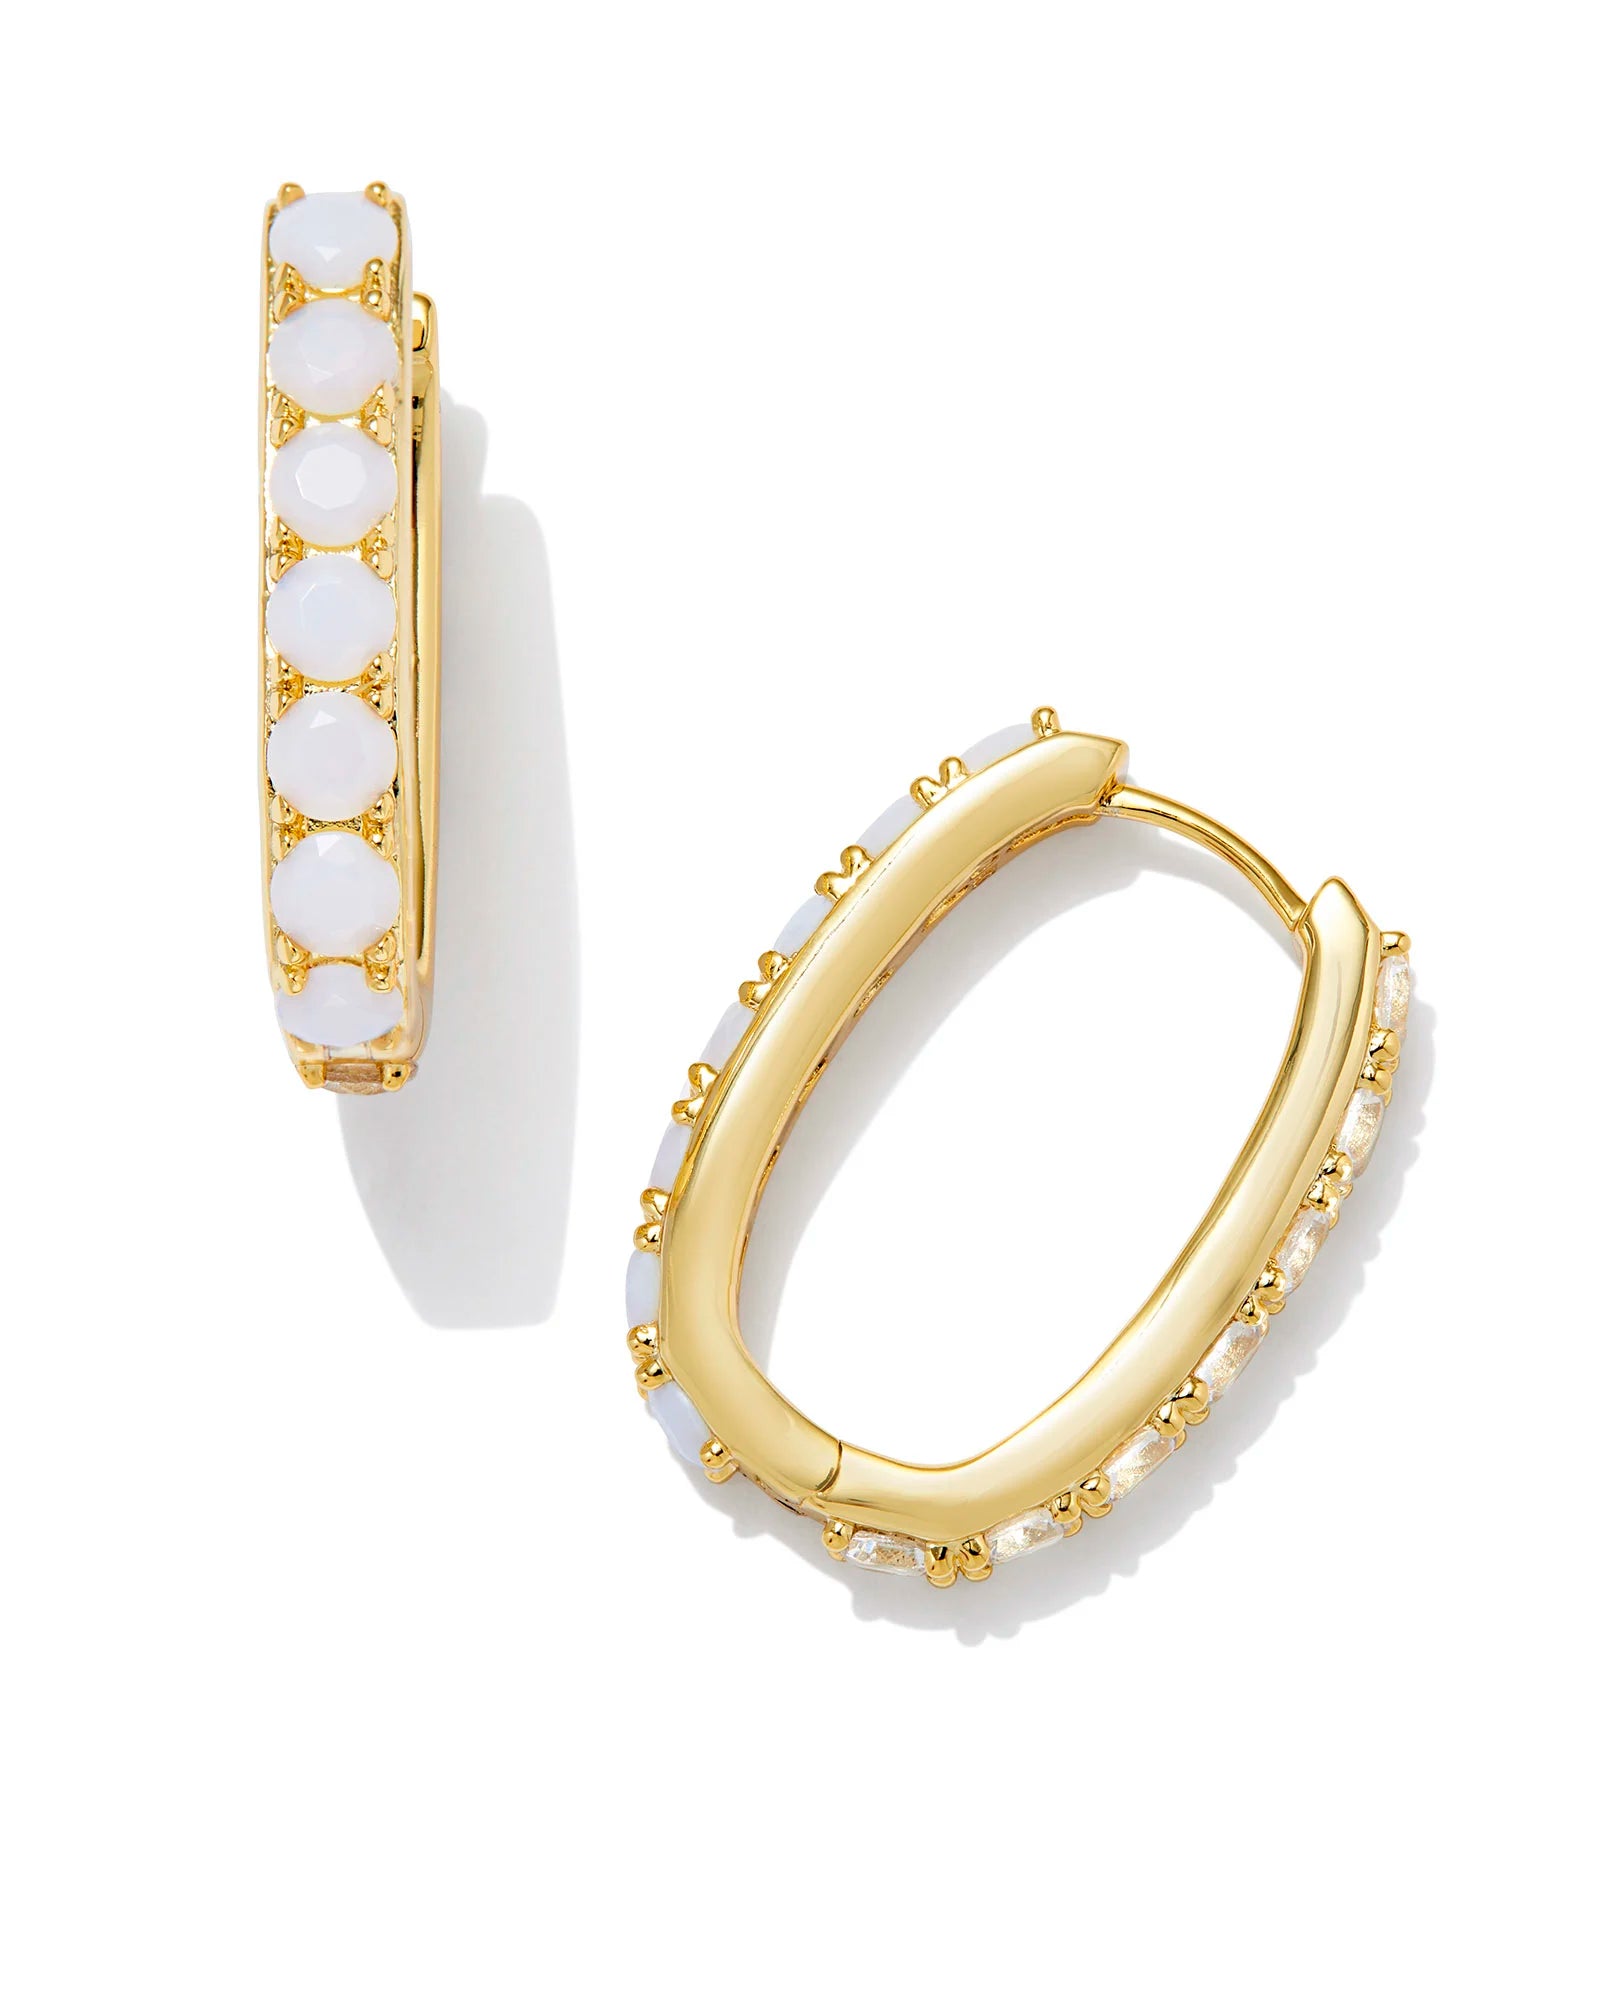 Kendra Scott | Chandler Gold Hoop Earrings in White Opalite Mix - Giddy Up Glamour Boutique